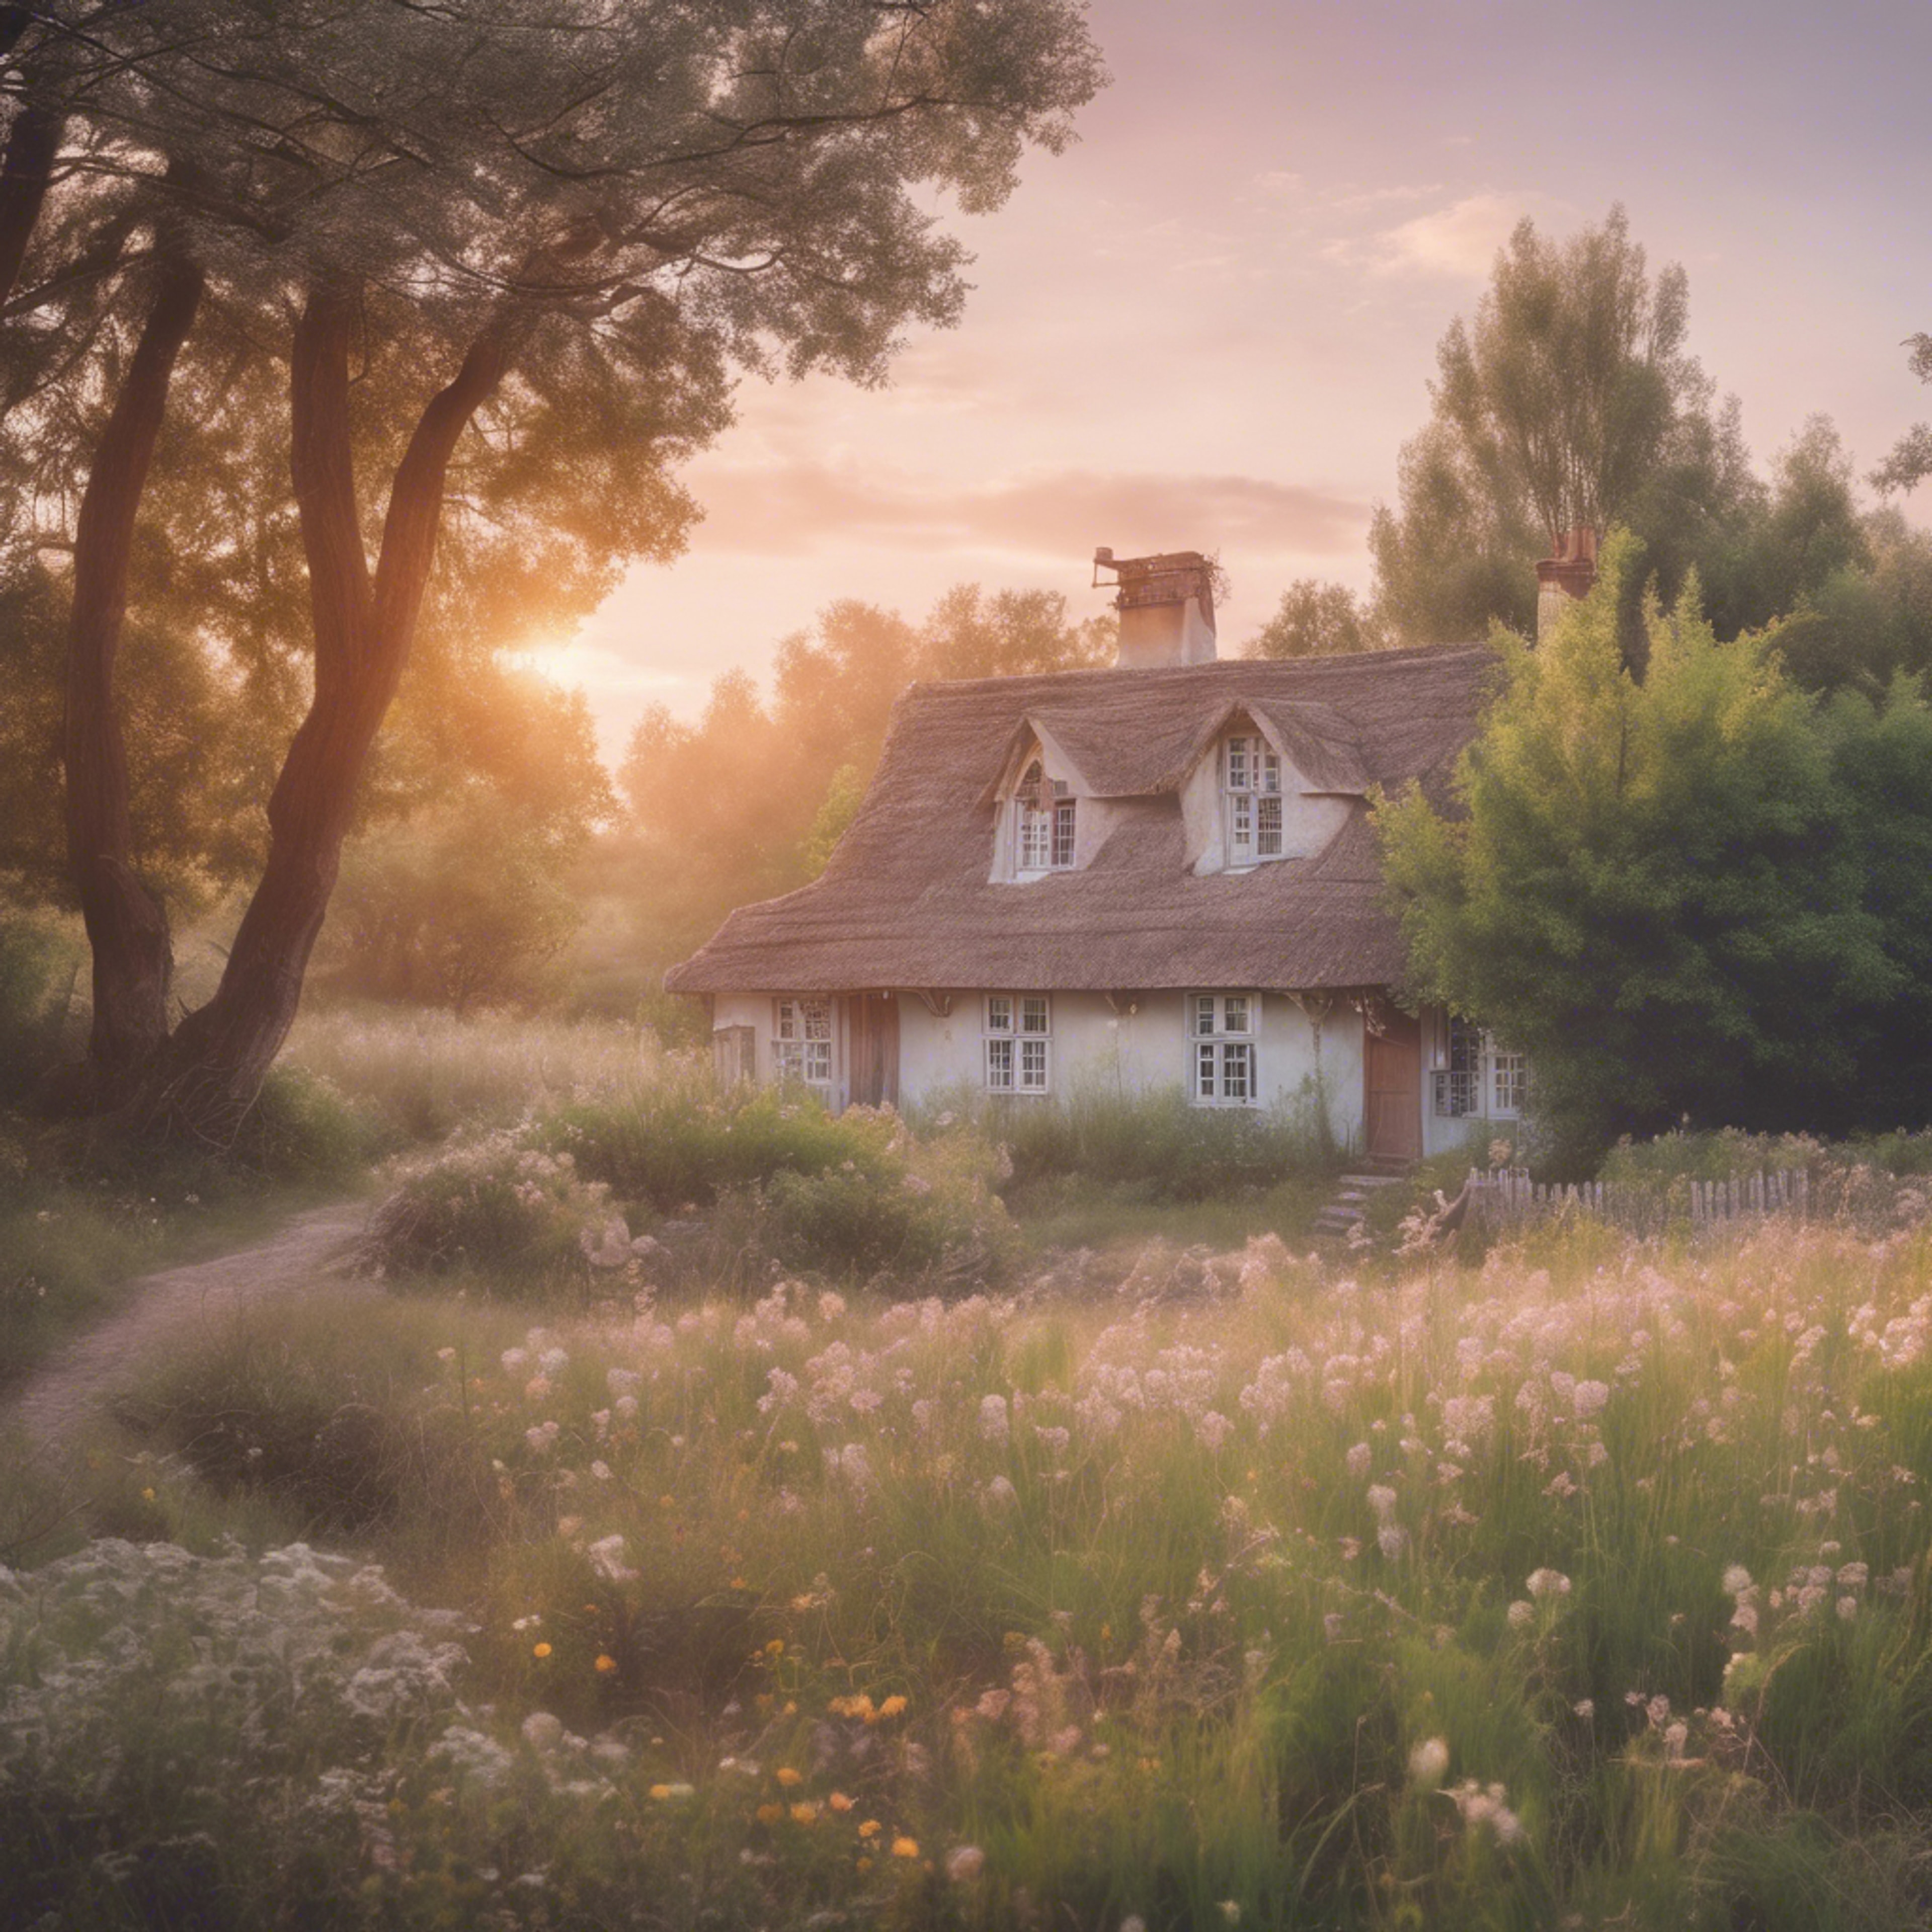 A soft pastel sunrise over rustic cottages, birthing ethereal aesthetic beauty Валлпапер[daea3b7a39e14a169eb1]